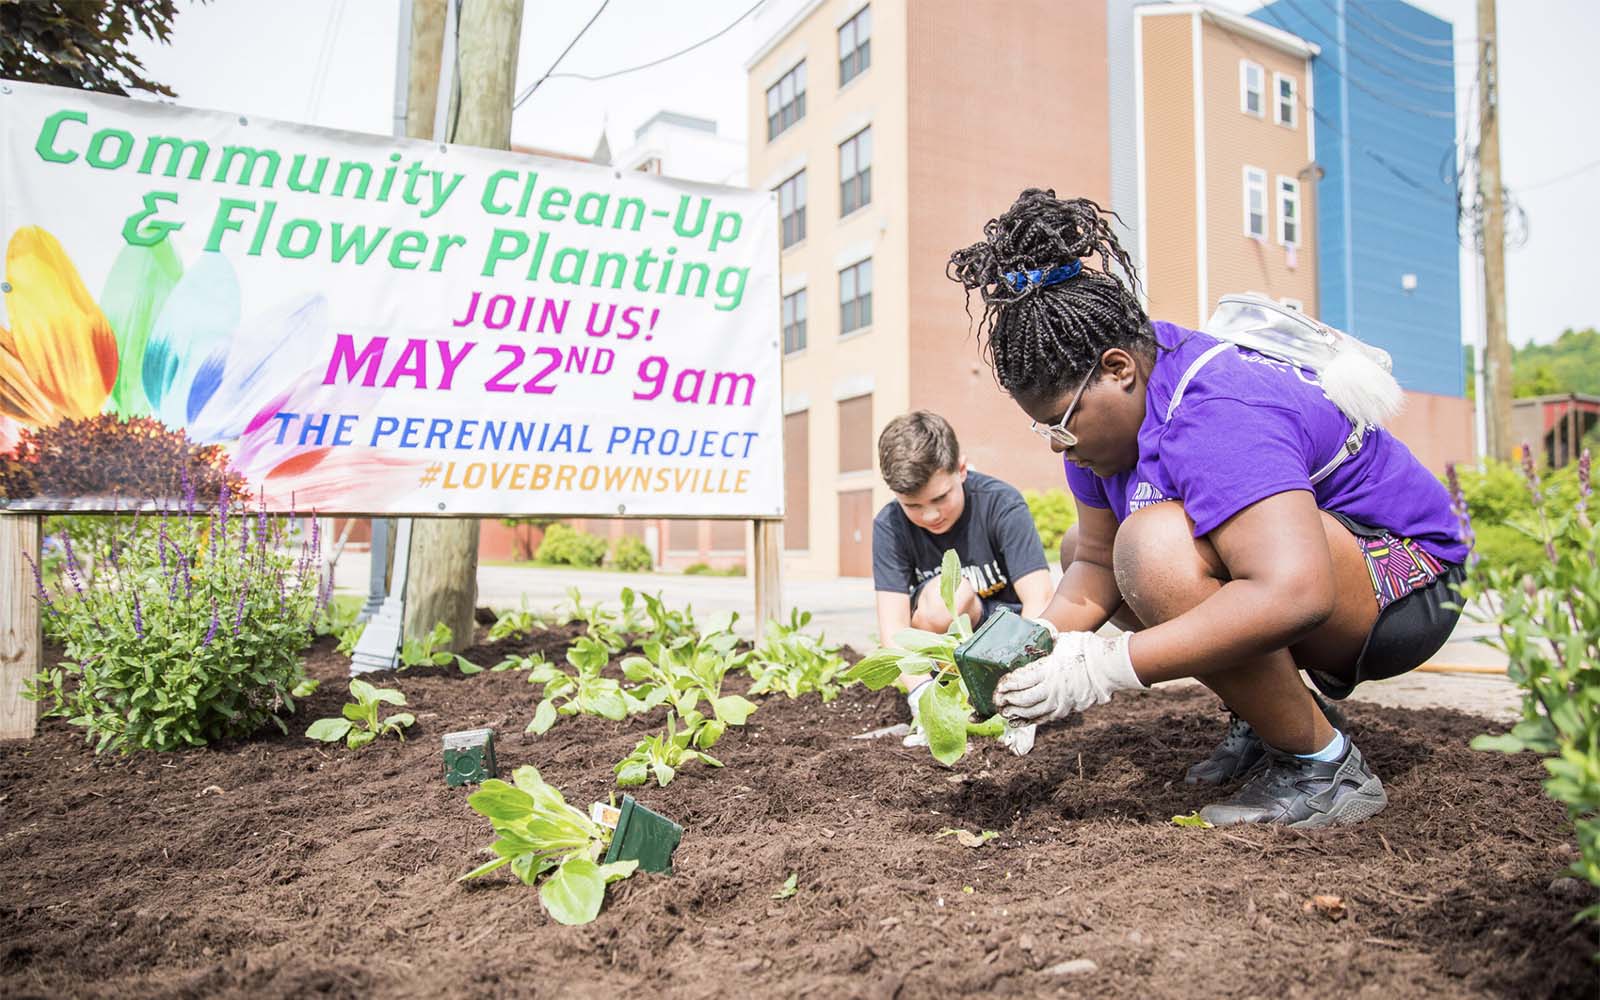 Two people, one dark skinned and one white, crouch down to plant flowers in front of a sign that reads "Community Clean-up and Flower Planting May 22"